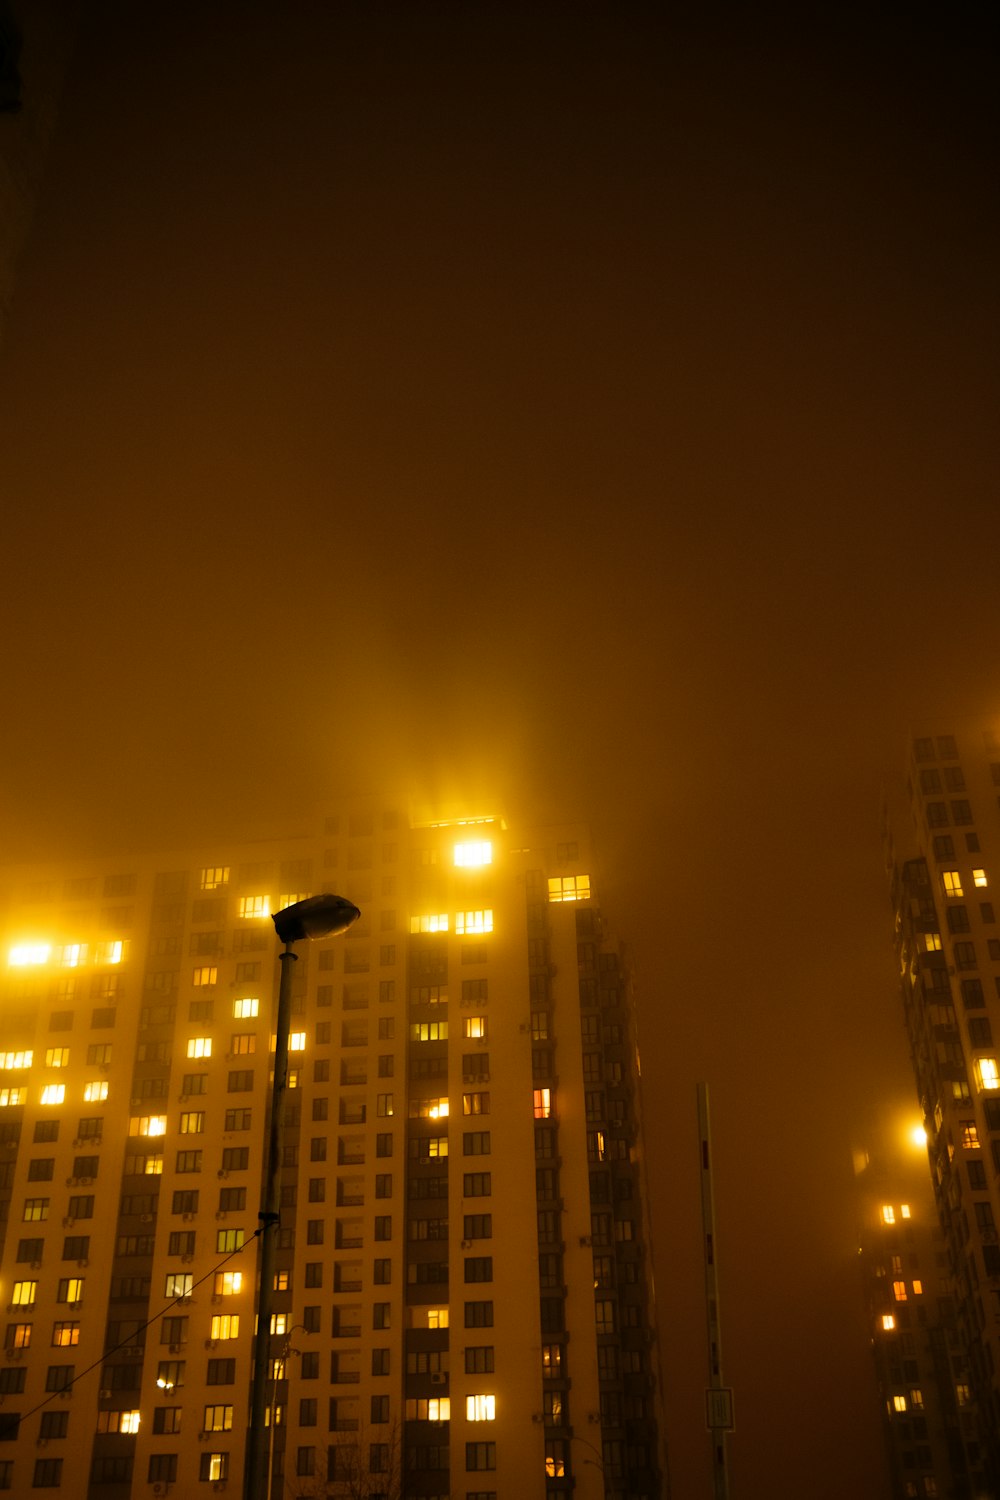 a foggy night in a city with tall buildings